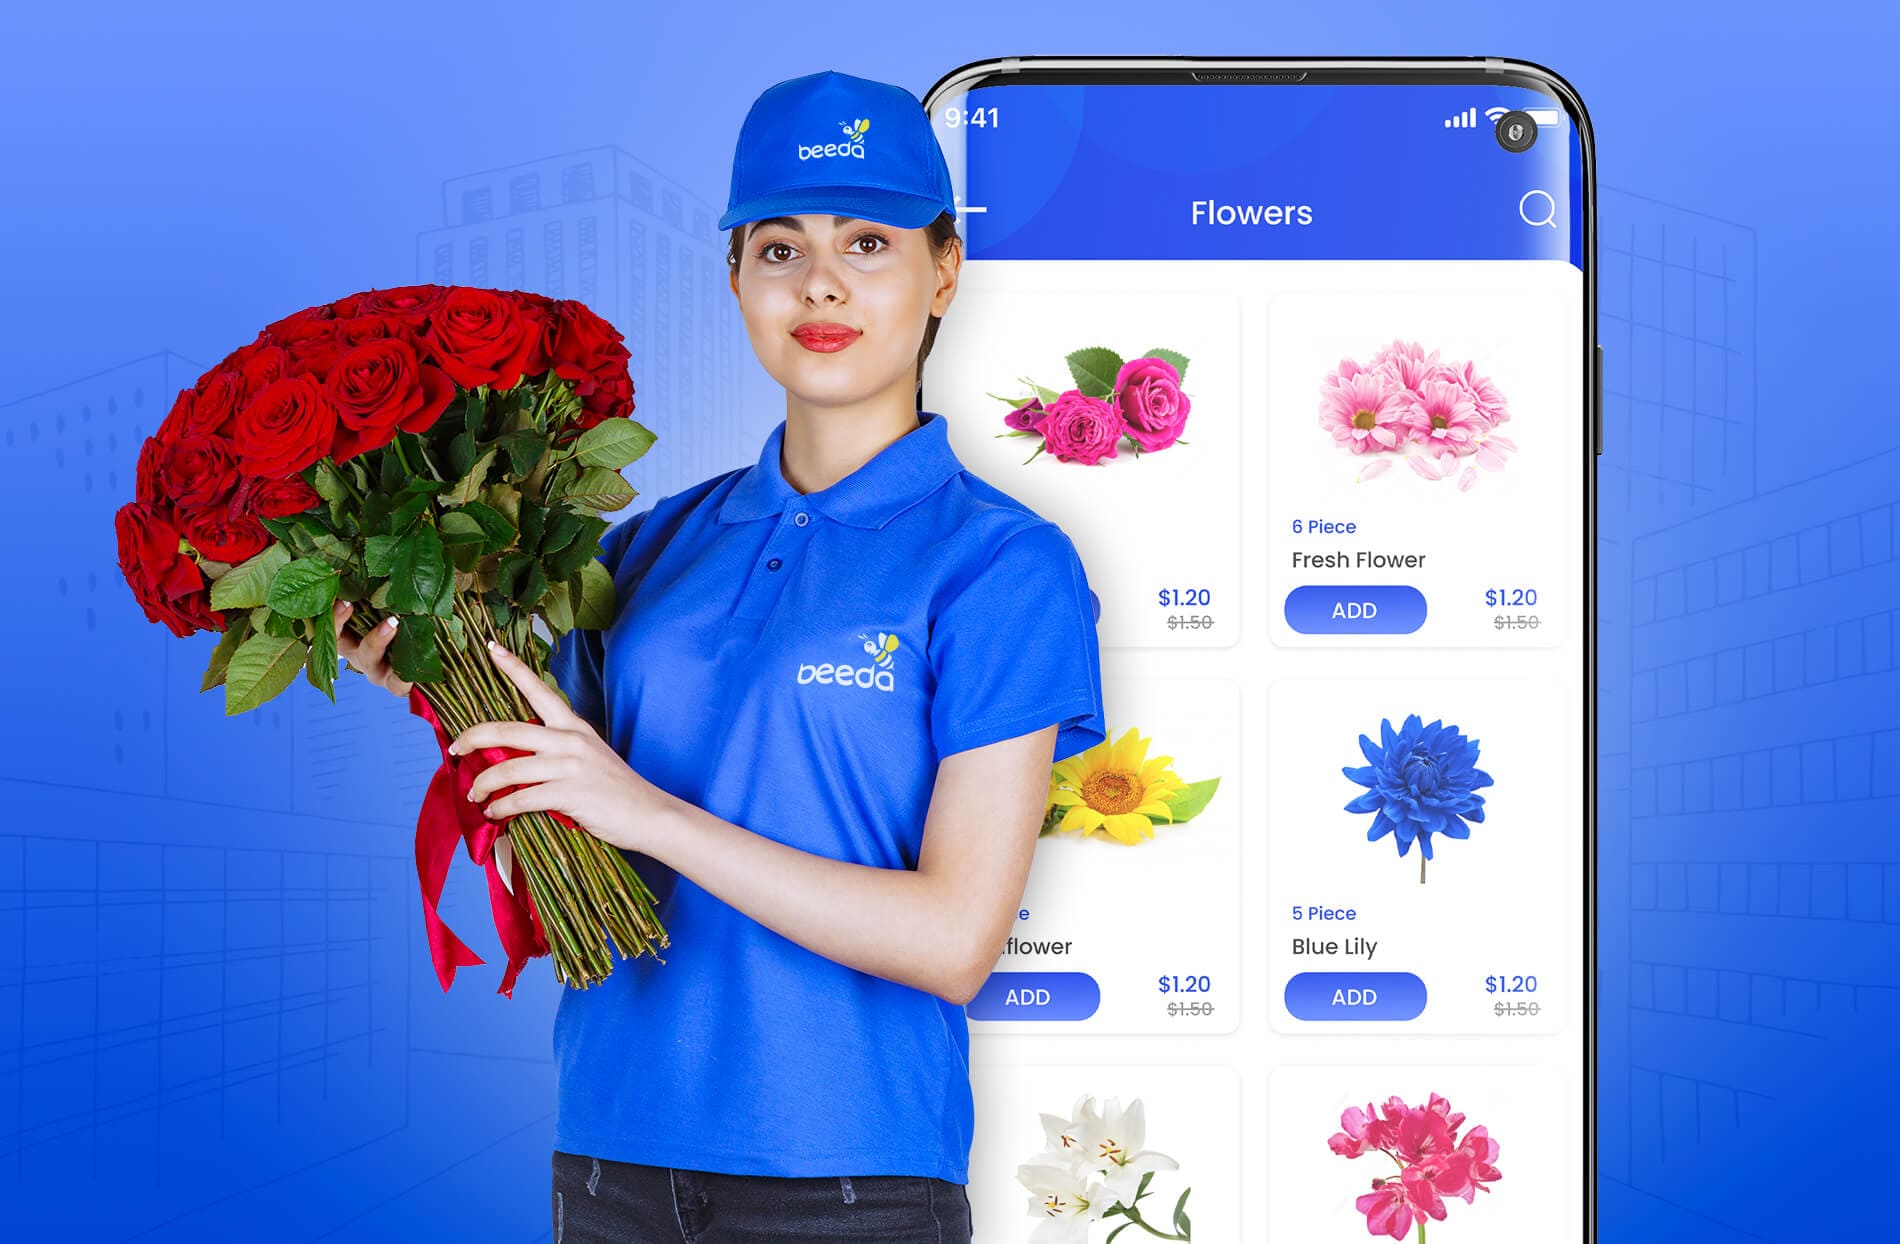 Flower Dlivery Service with Beeda Megaapp